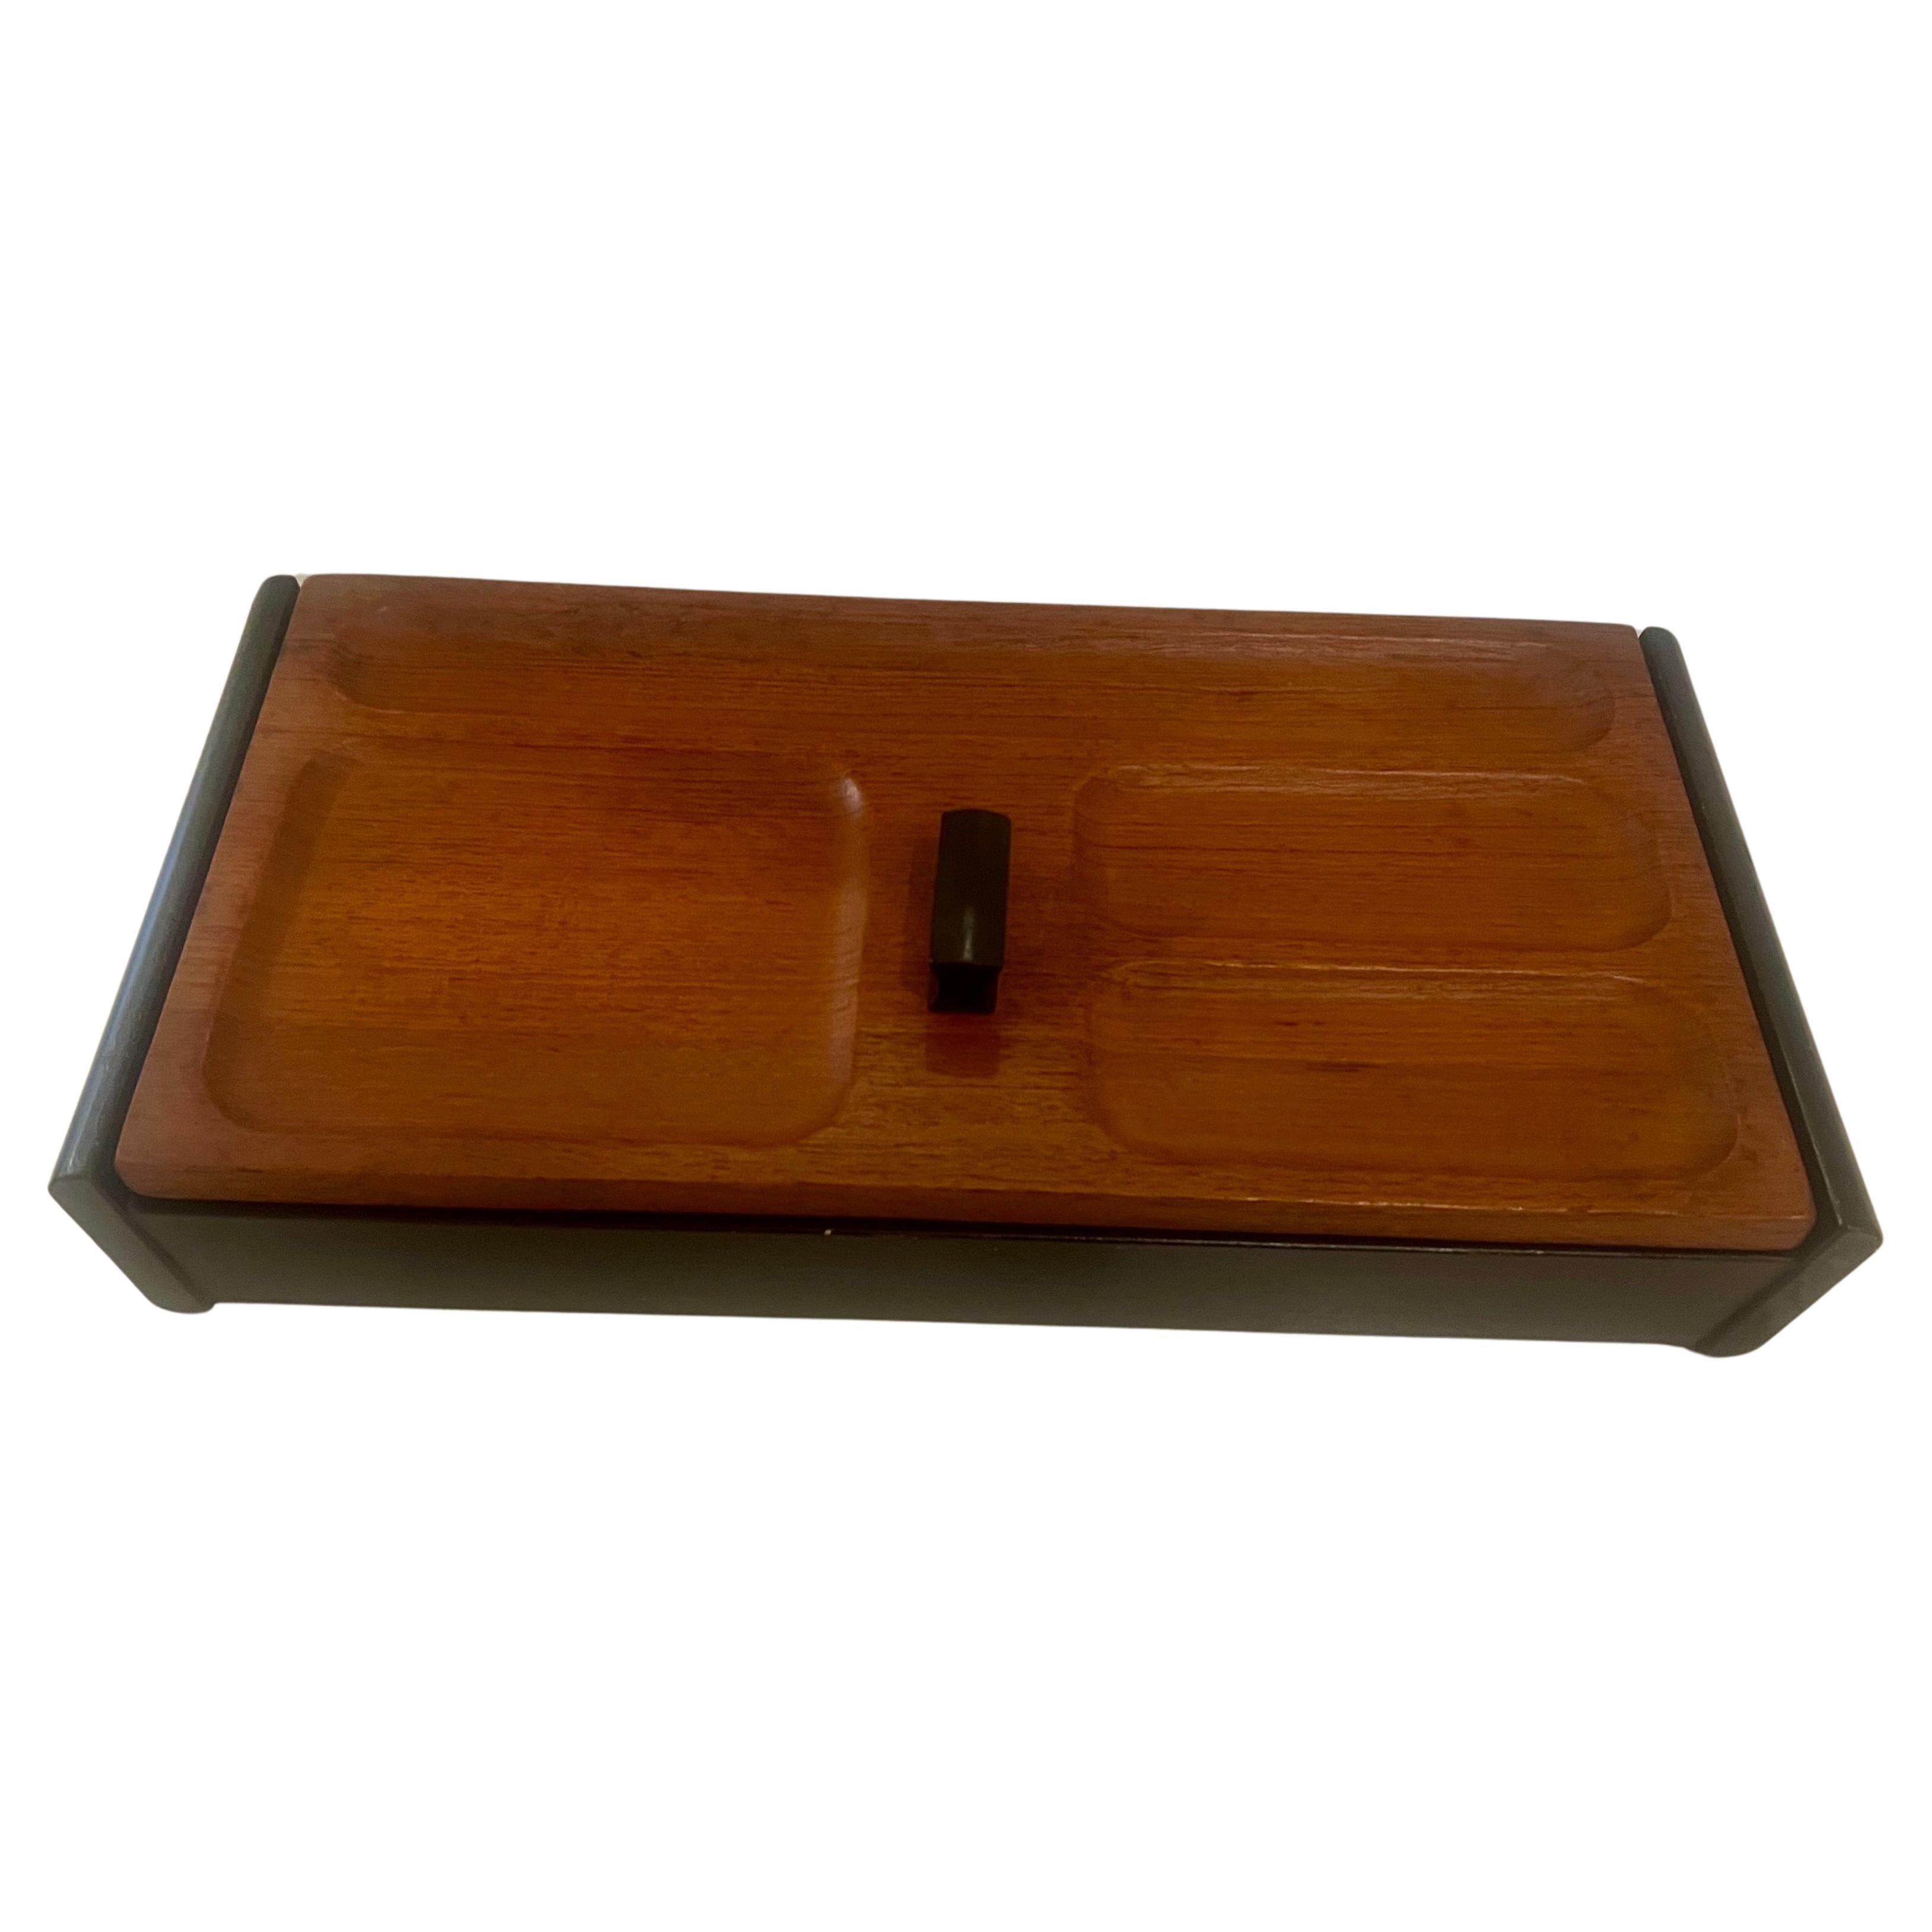 Japanese Danish Modern Solid Teak Desk Top Jewelry Box Made in Japan For Sale